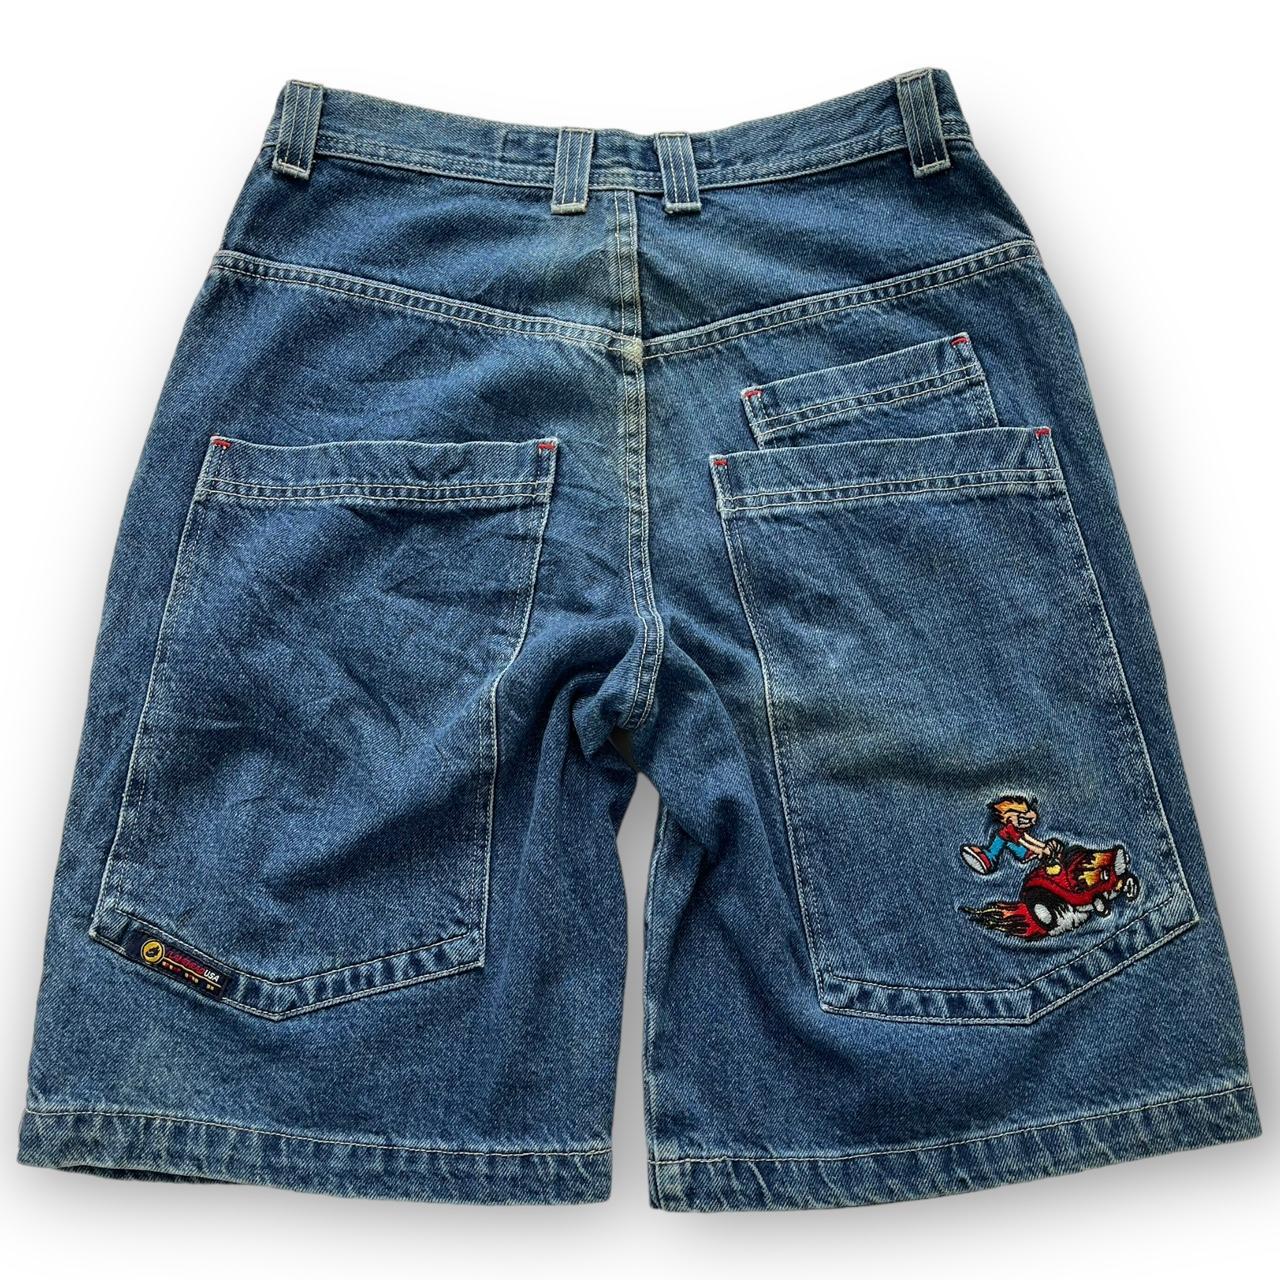 JNCO Men's Blue and Red Shorts | Depop